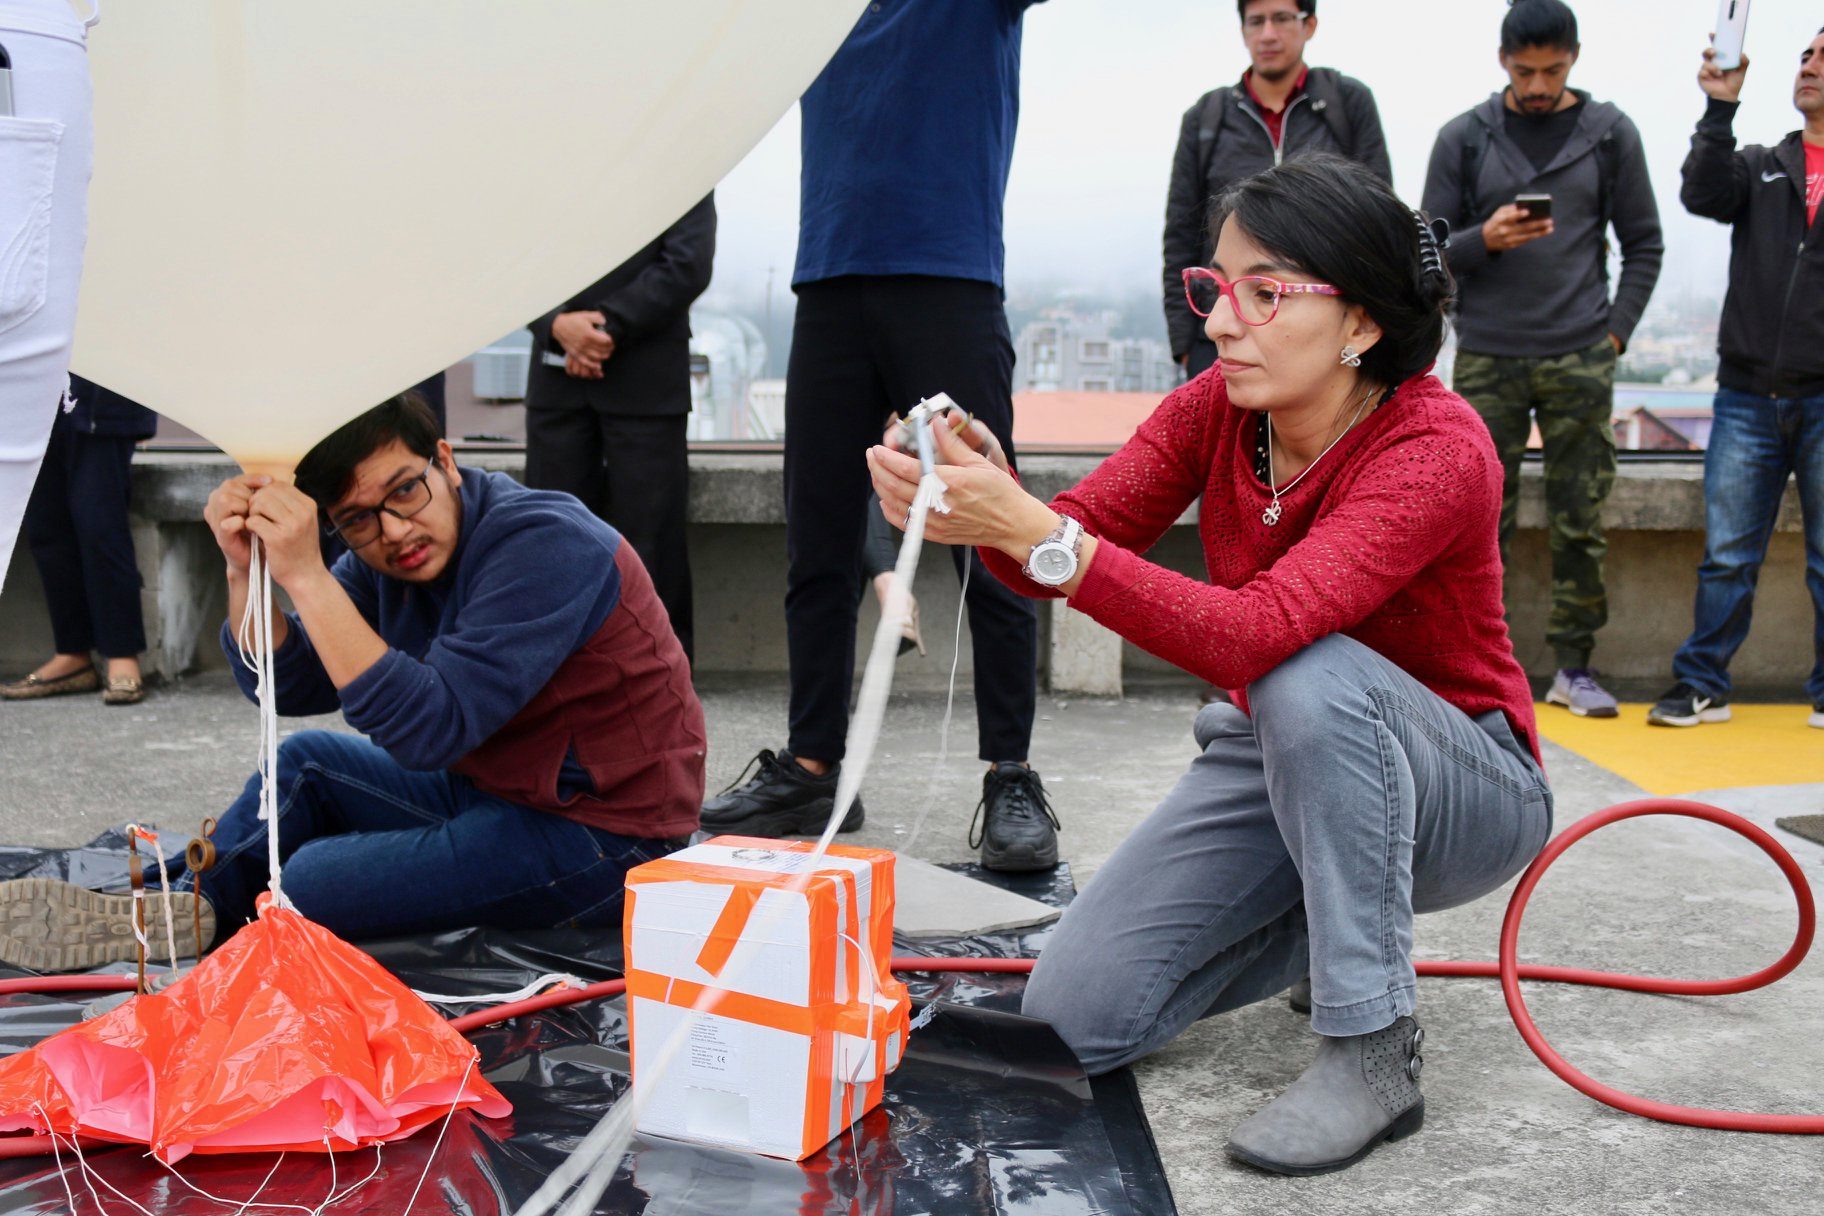 Preparations to launch the first ozonesonde of the ECHOZ project from Universidad San Francisco de Quito on 6 March 2020. On the picture, M. Cazorla and E. Herrera complete balloon filling with helium and anchoring ozonesonde-radiosonde package to platform prior to launching.